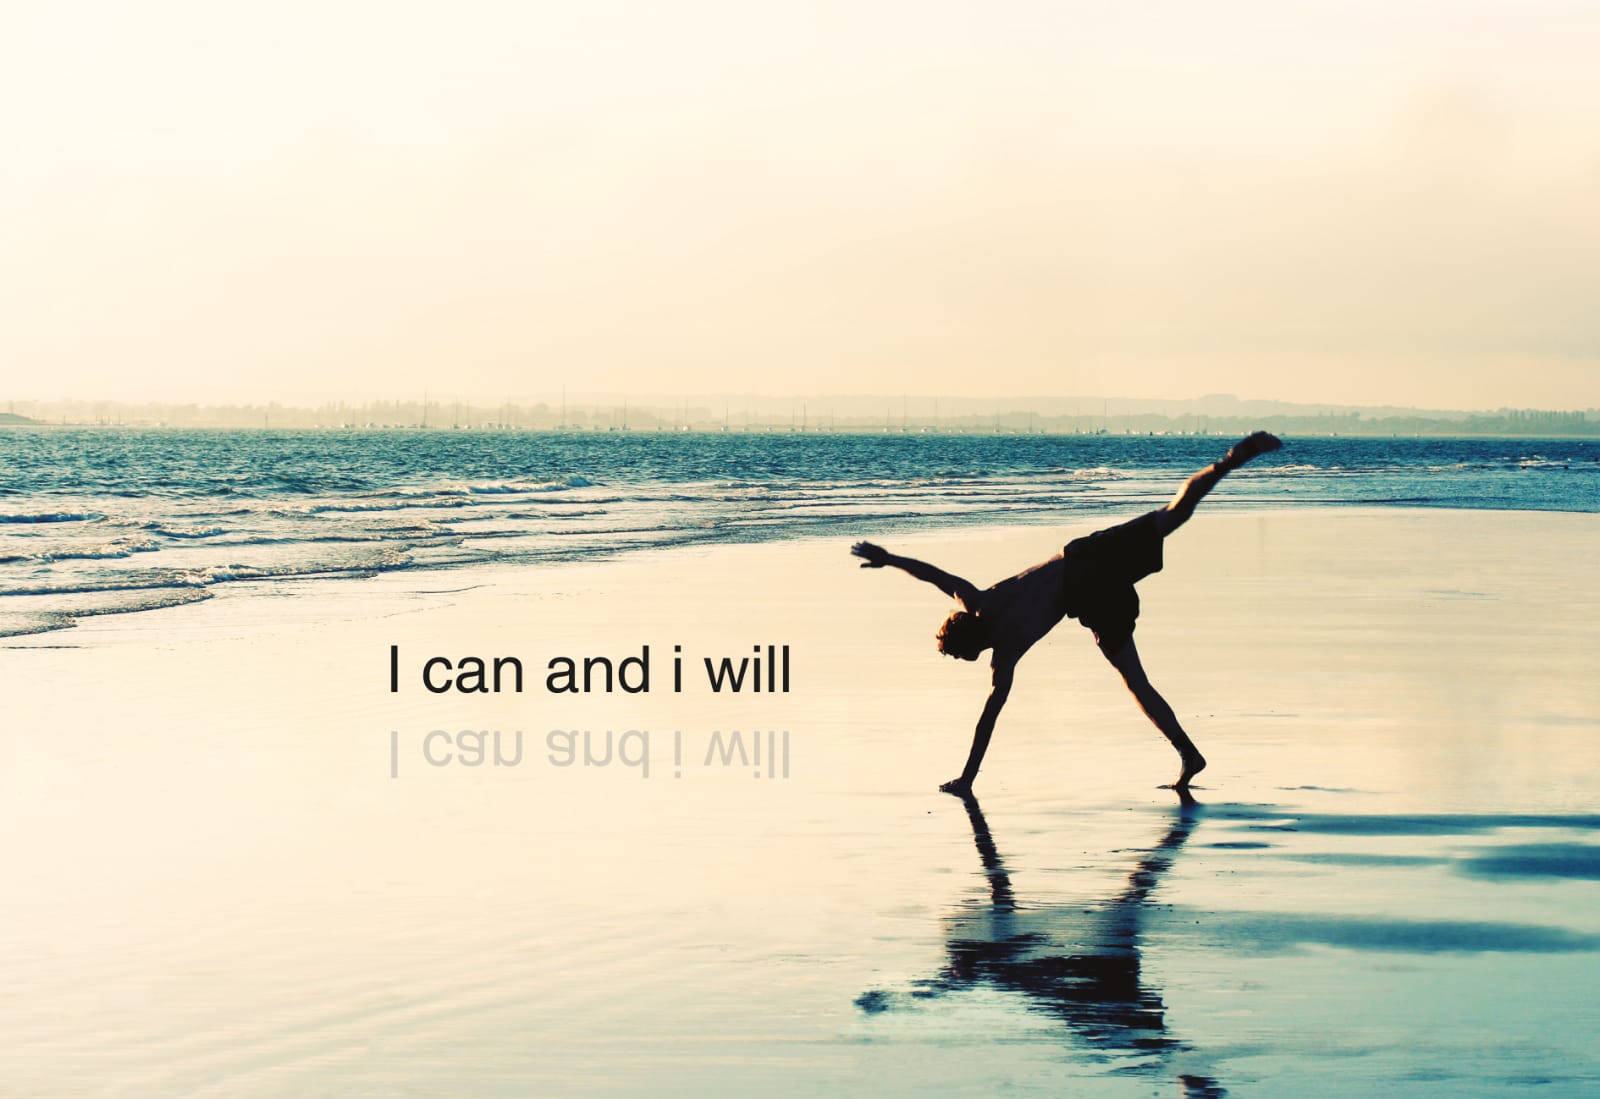 I can and i will